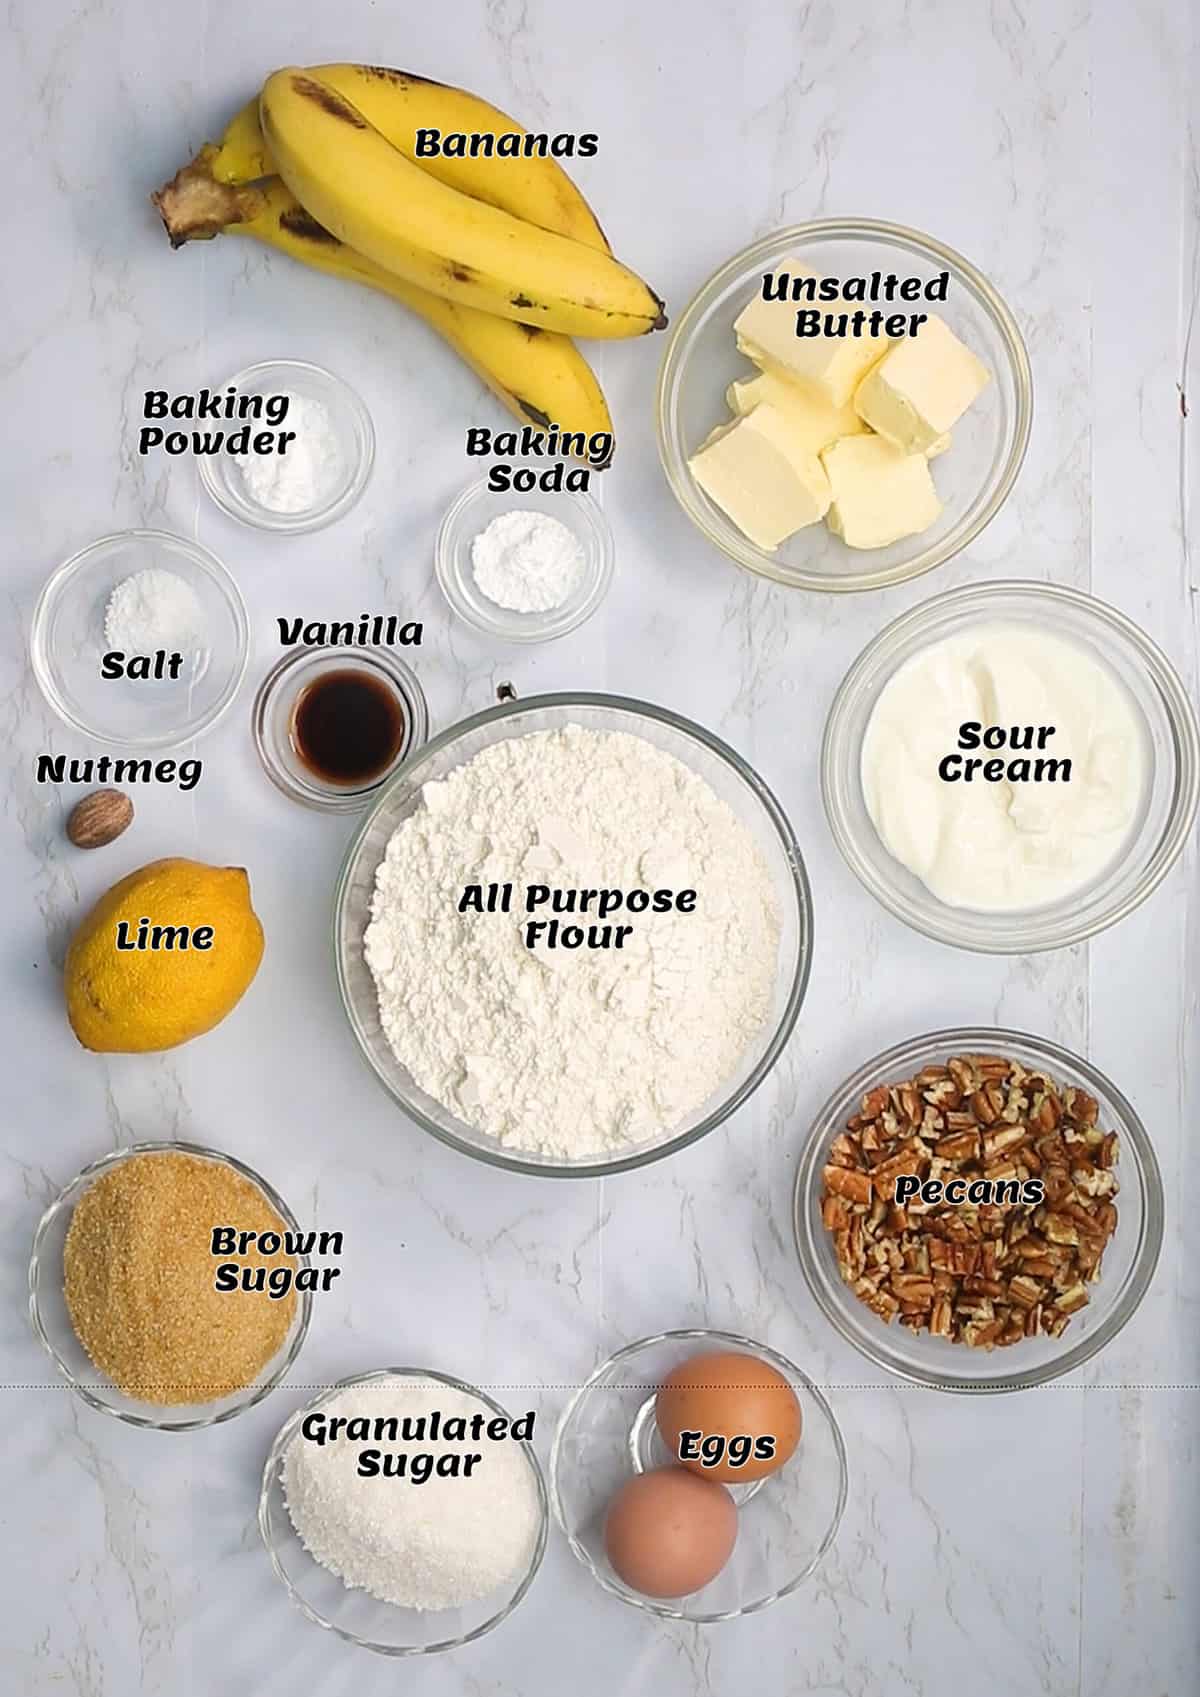 Ingredients needed to make this recipe